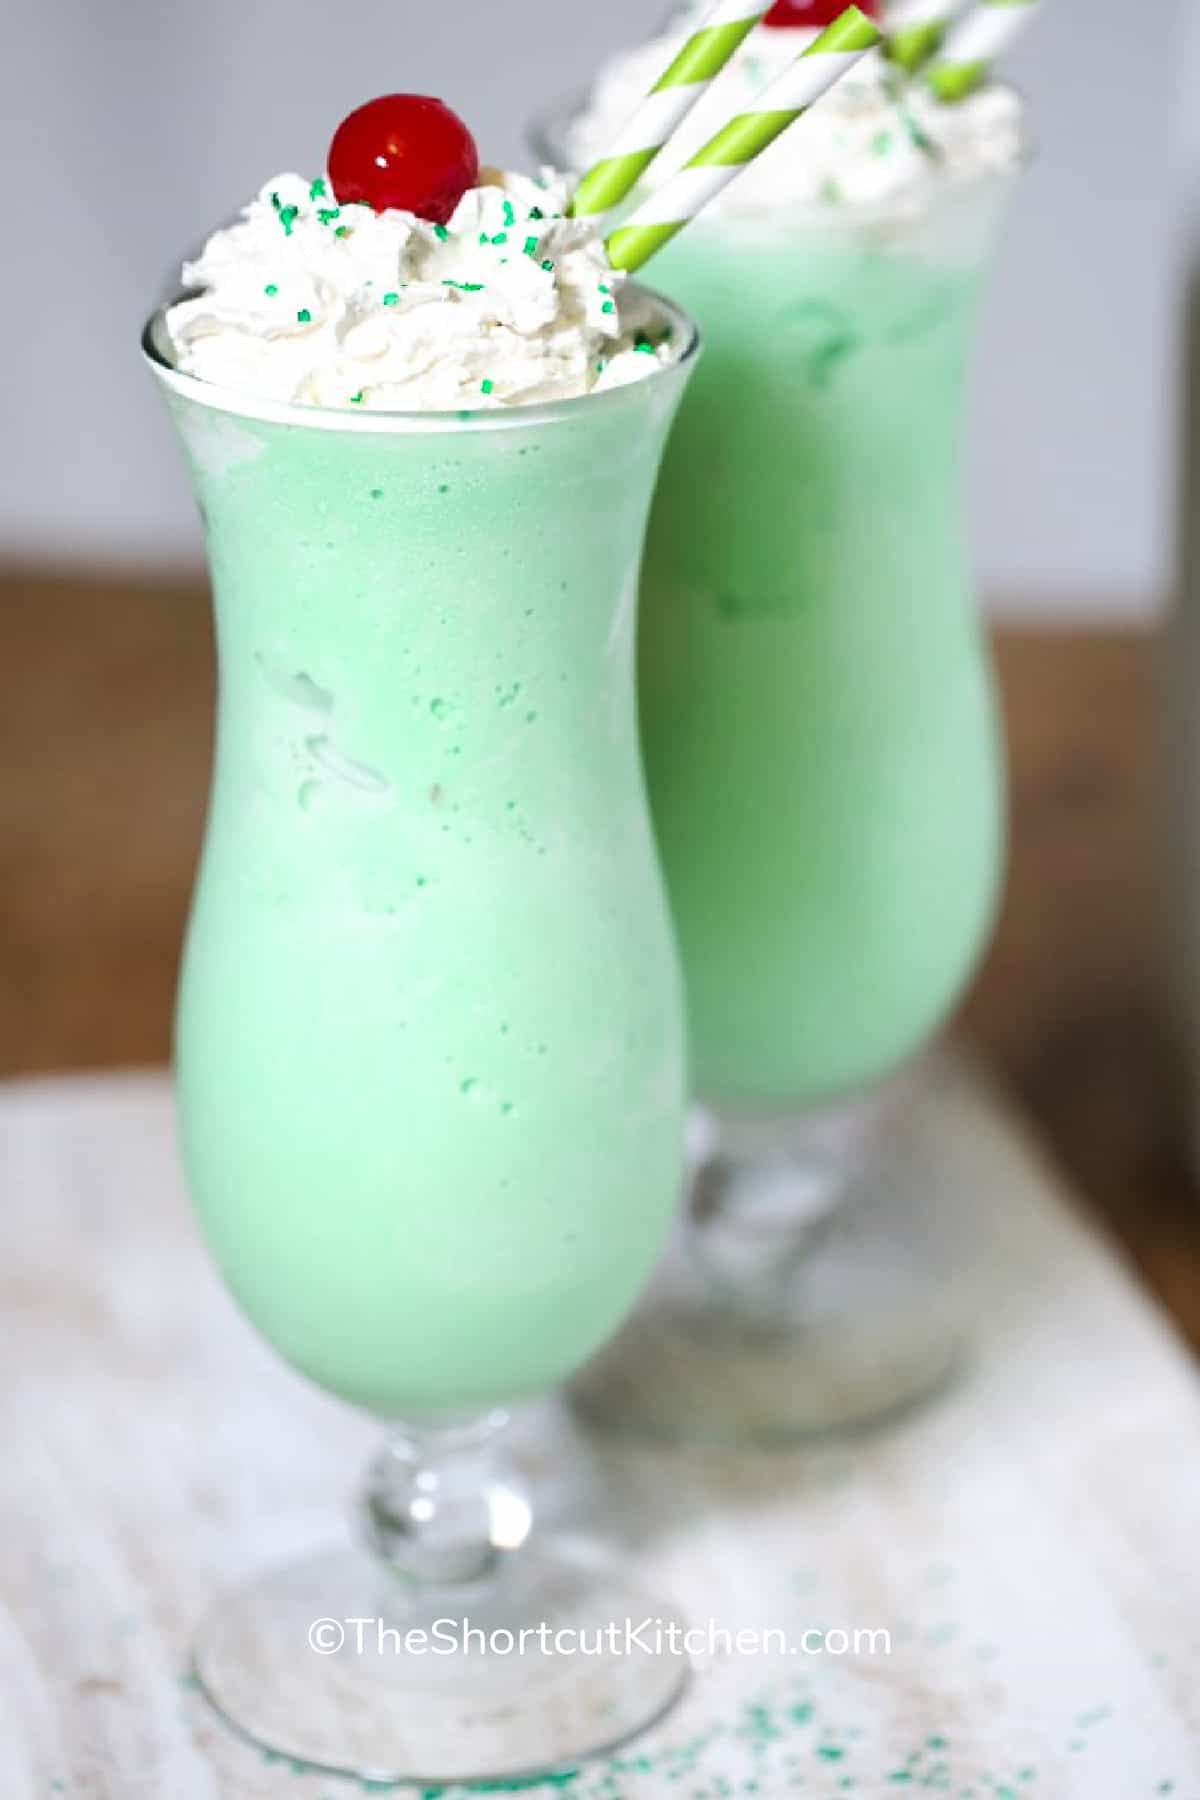 copycat shamrock shake recipe in a glass, topped with whipped cream, green sprinkles and a cherry